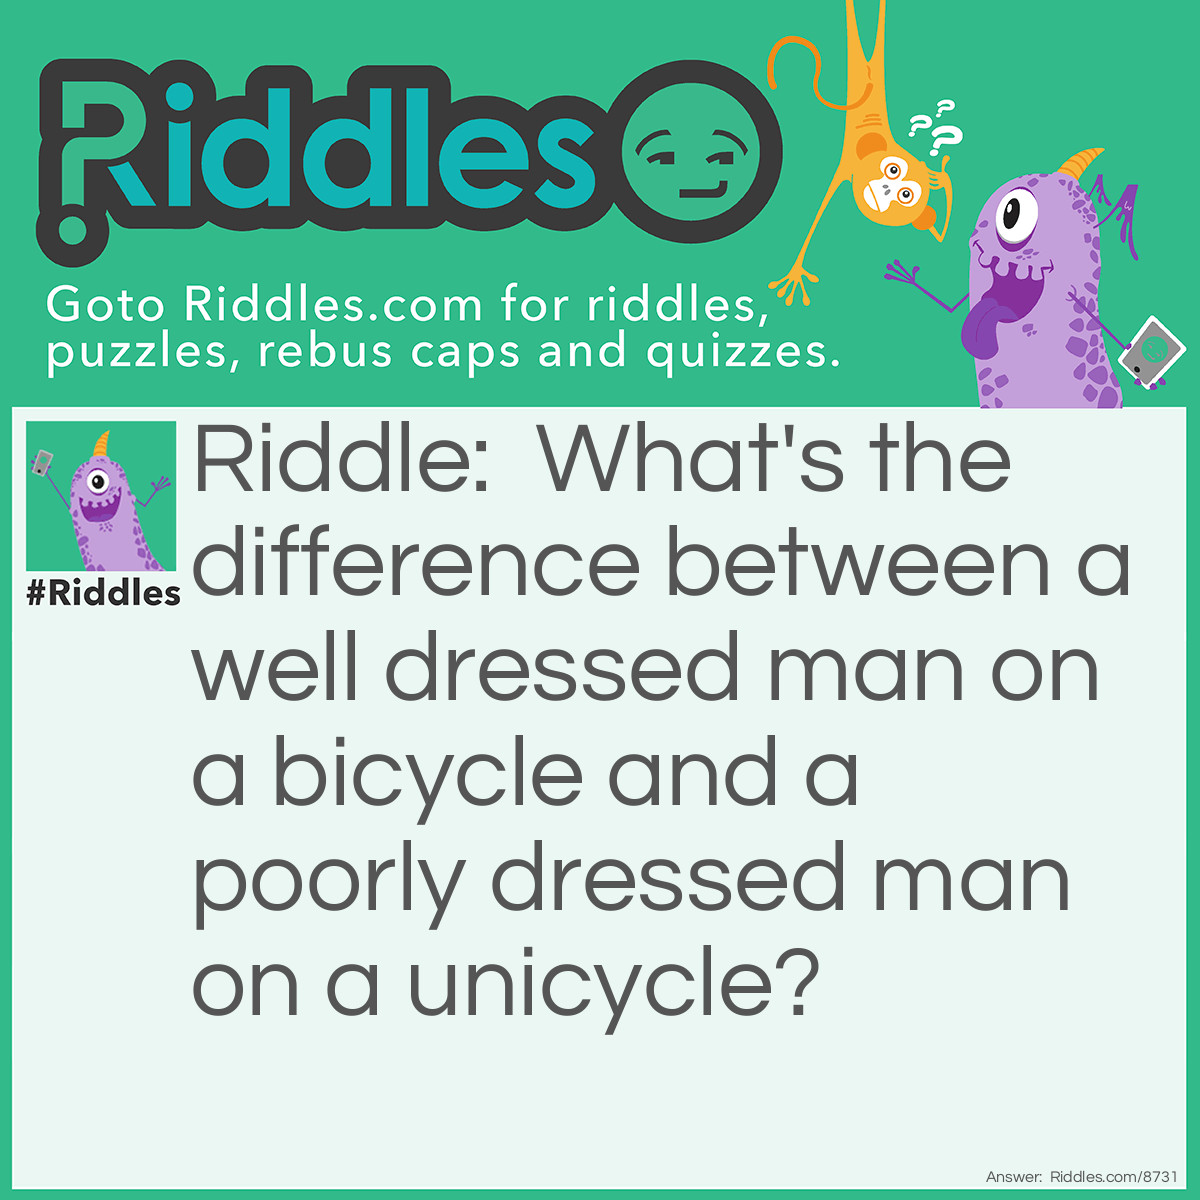 Riddle: What's the difference between a well dressed man on a bicycle and a poorly dressed man on a unicycle? Answer: Attire.